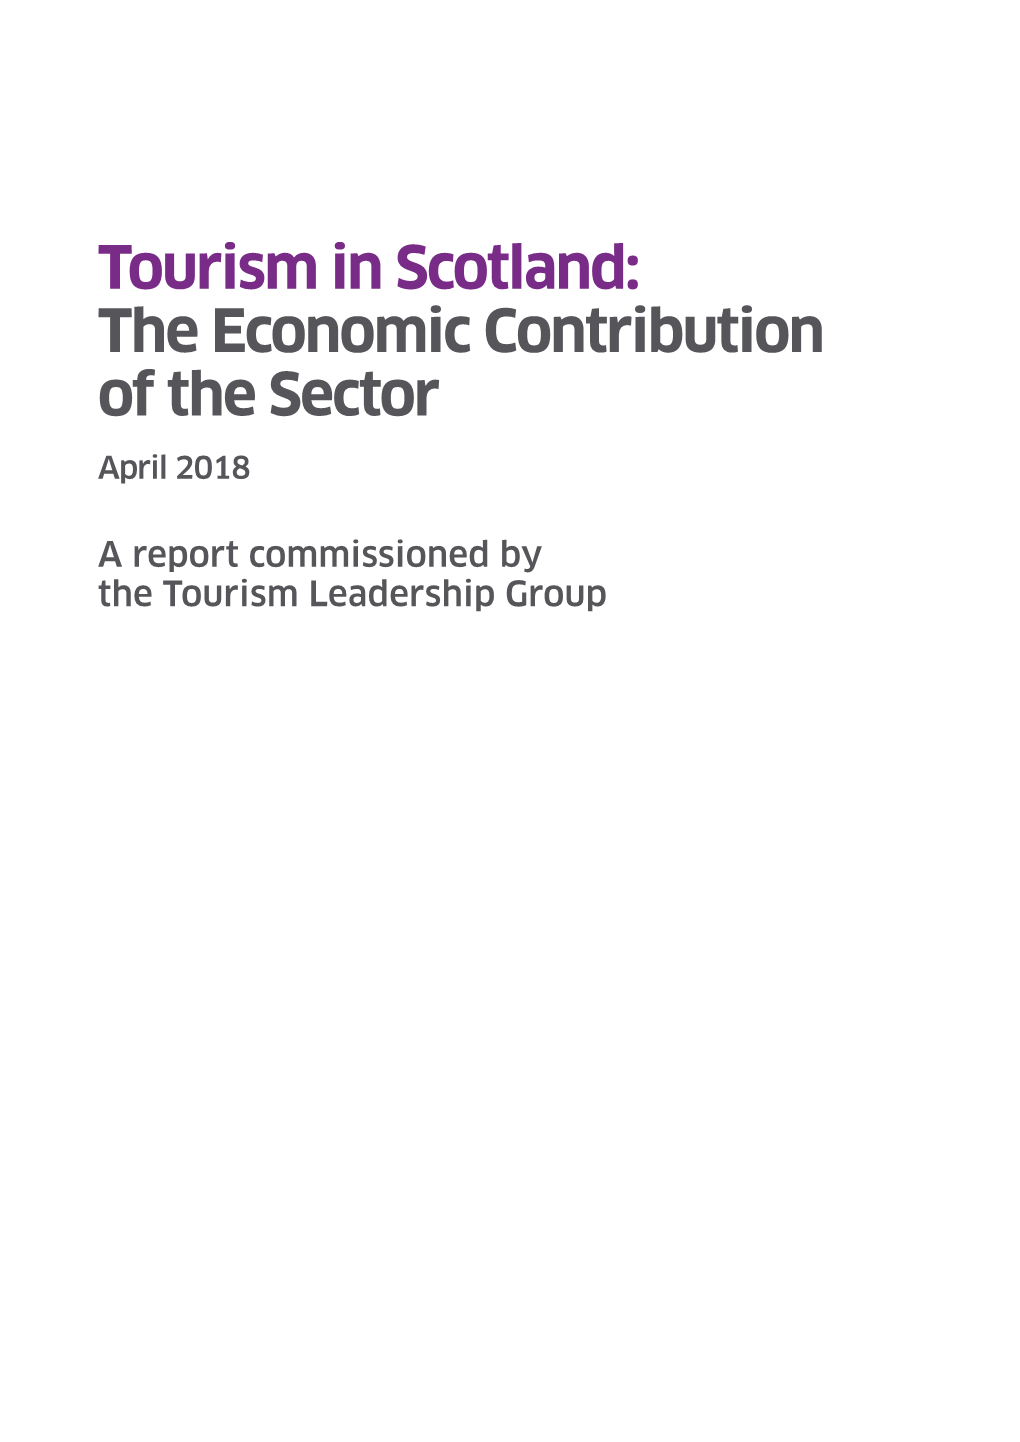 Tourism in Scotland: the Economic Contribution of the Sector, April 2018